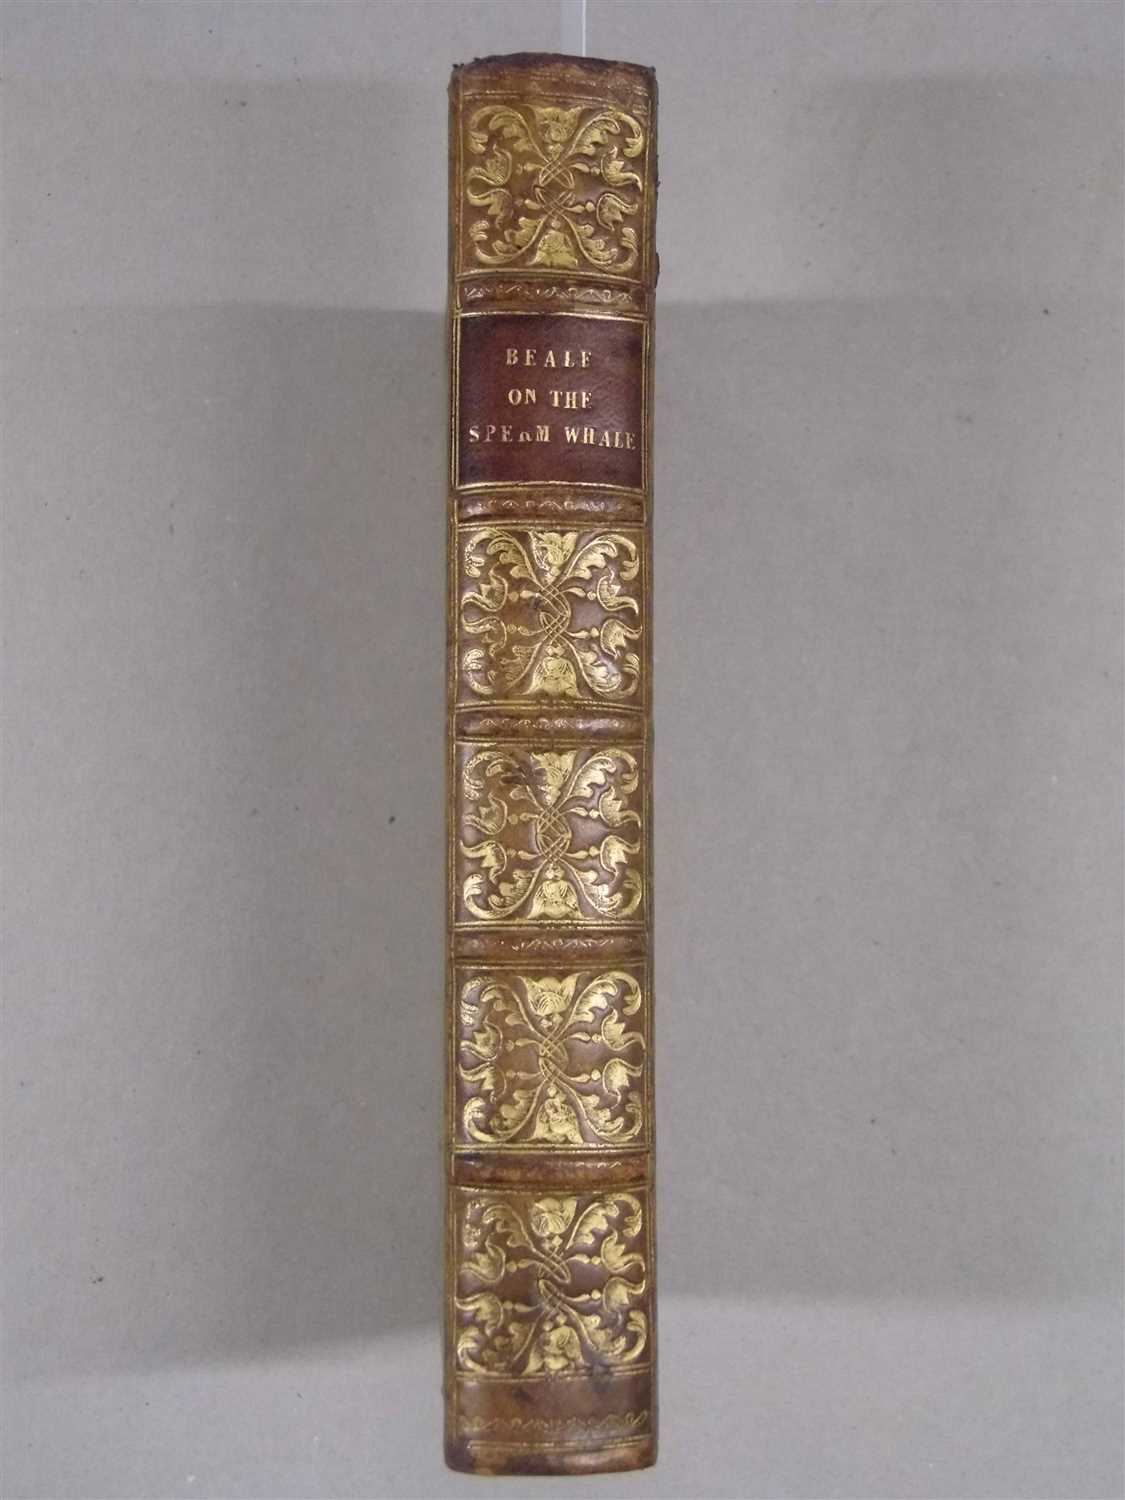 Lot 13 - Beale (Thomas). The Natural History of the Sperm Whale, 2nd edition, John van Voorst, 1839